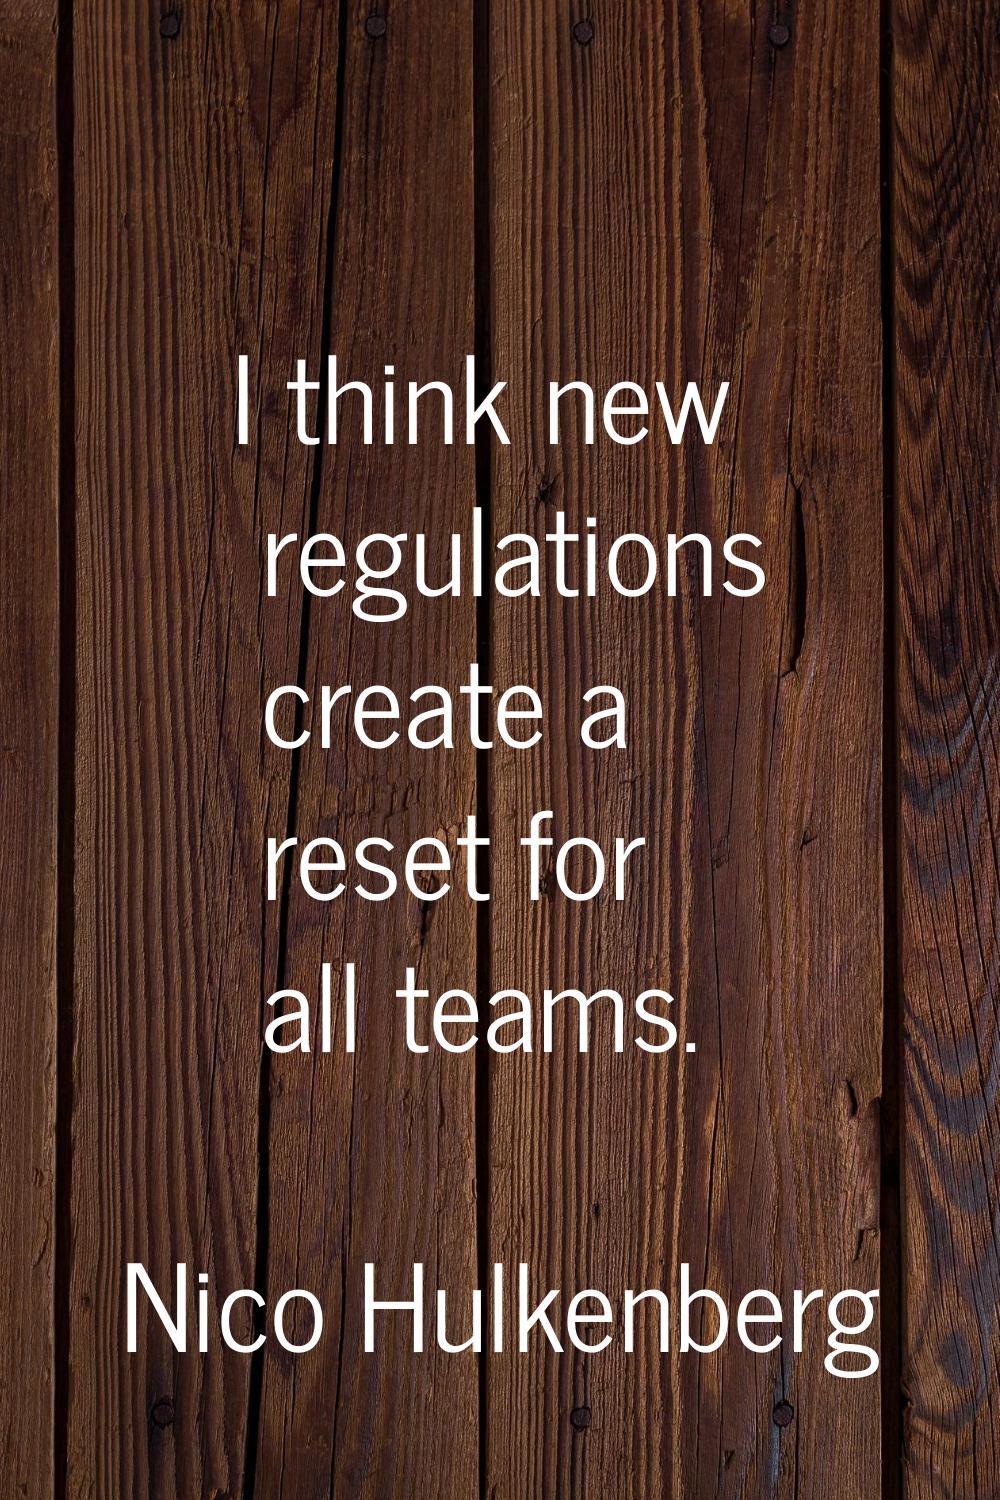 I think new regulations create a reset for all teams.